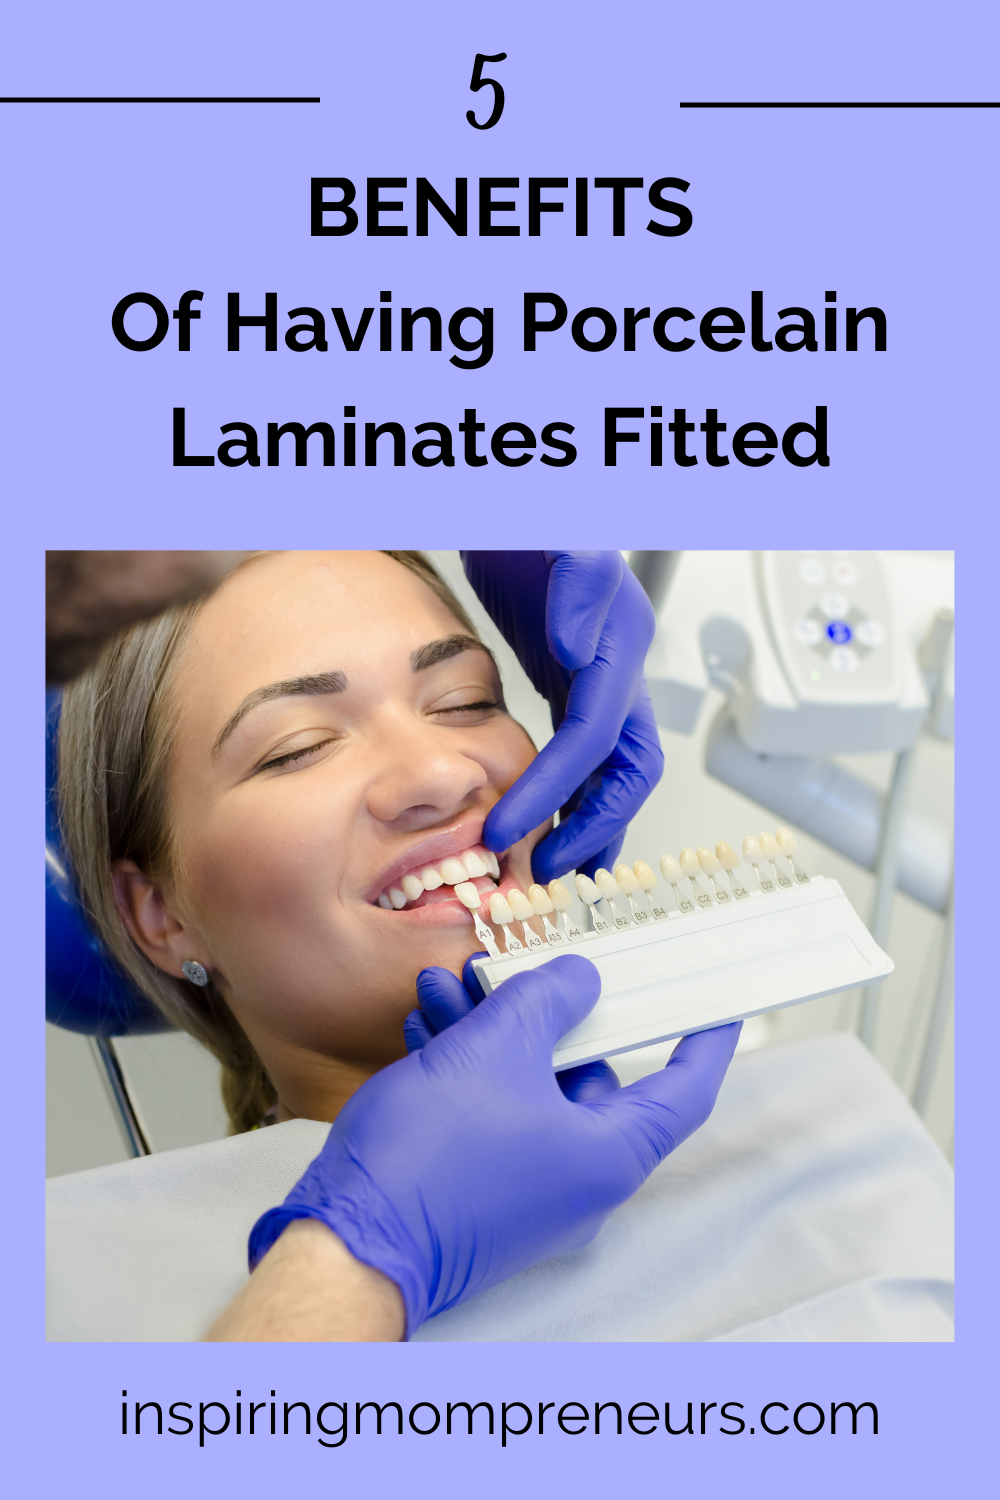 When it comes to choosing a cosmetic dental treatment nothing ticks the boxes quite like porcelain laminates. The benefits of having porcelain laminates fitted.